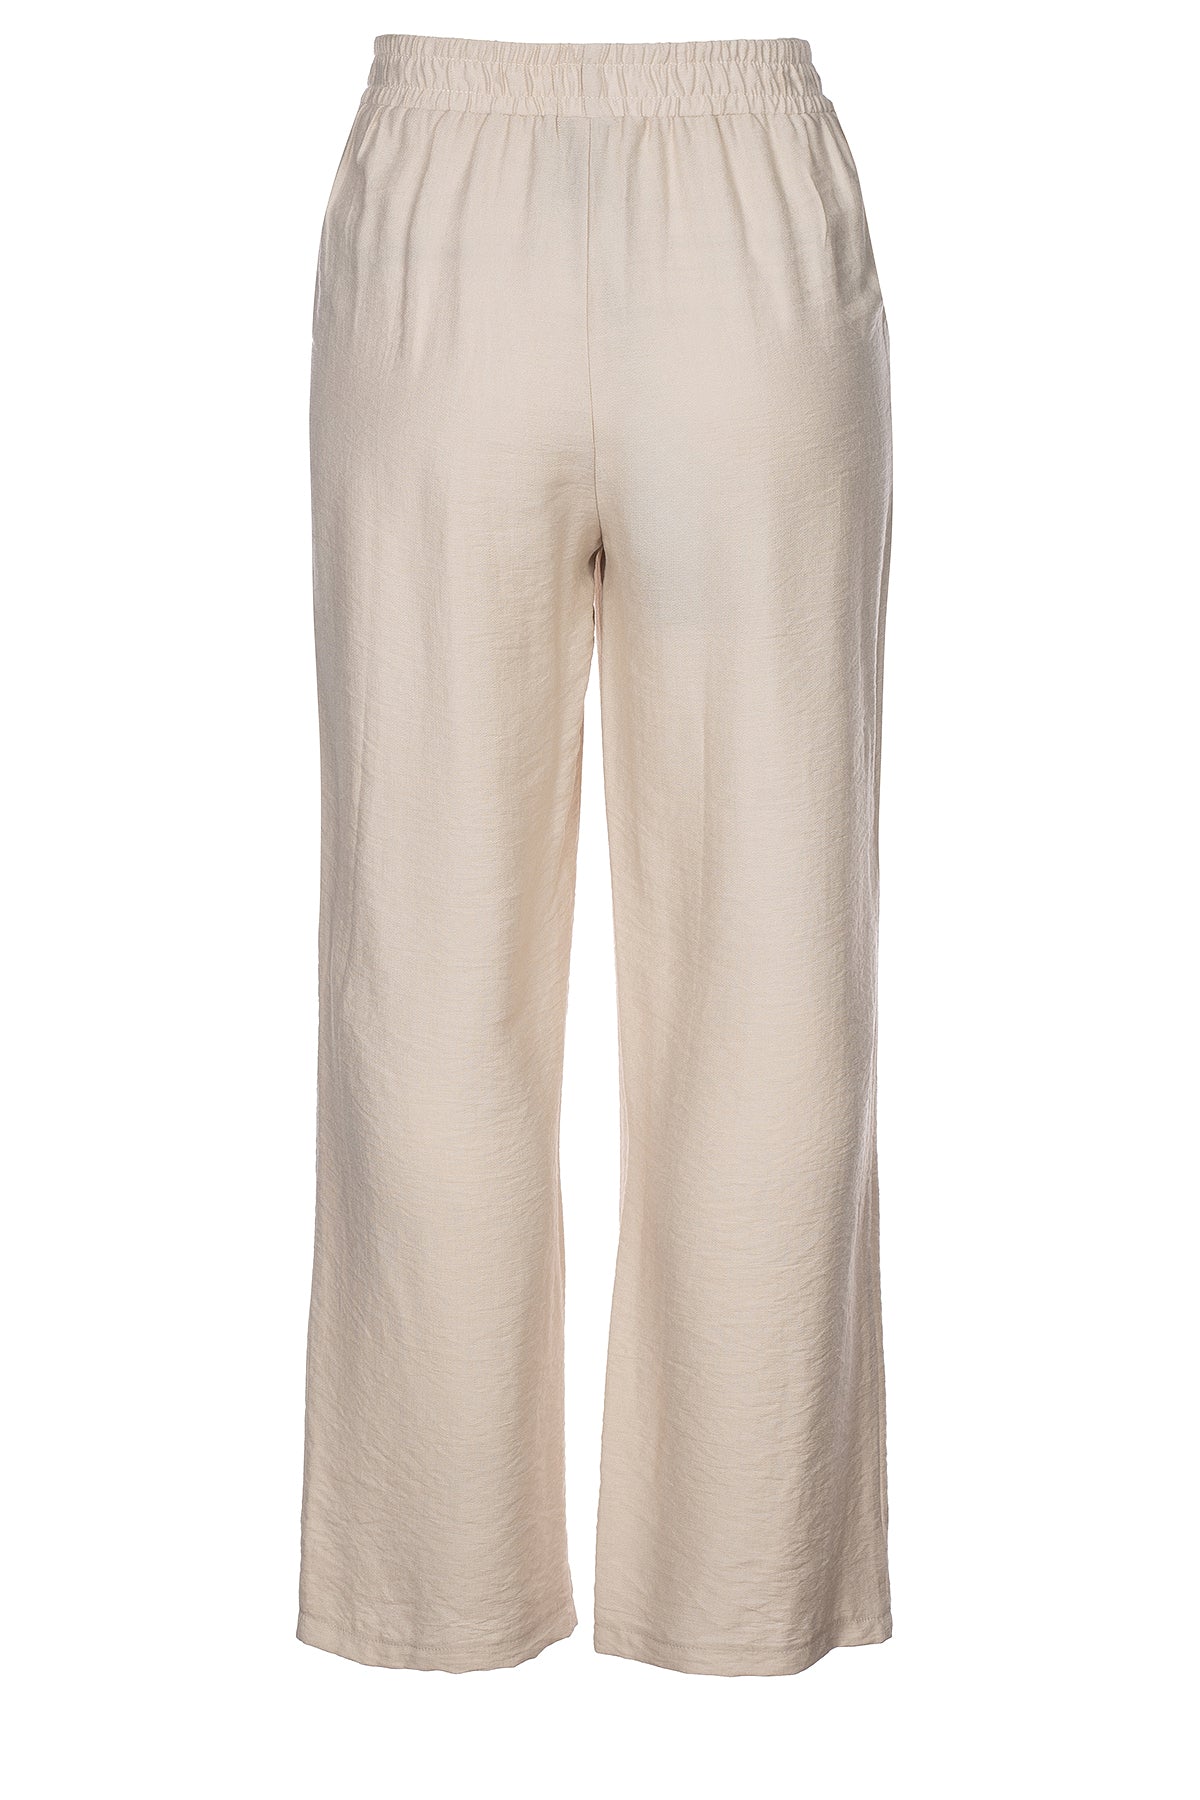 LUXZUZ // ONE TWO Alpano Pant Pant 764 Sand Hill